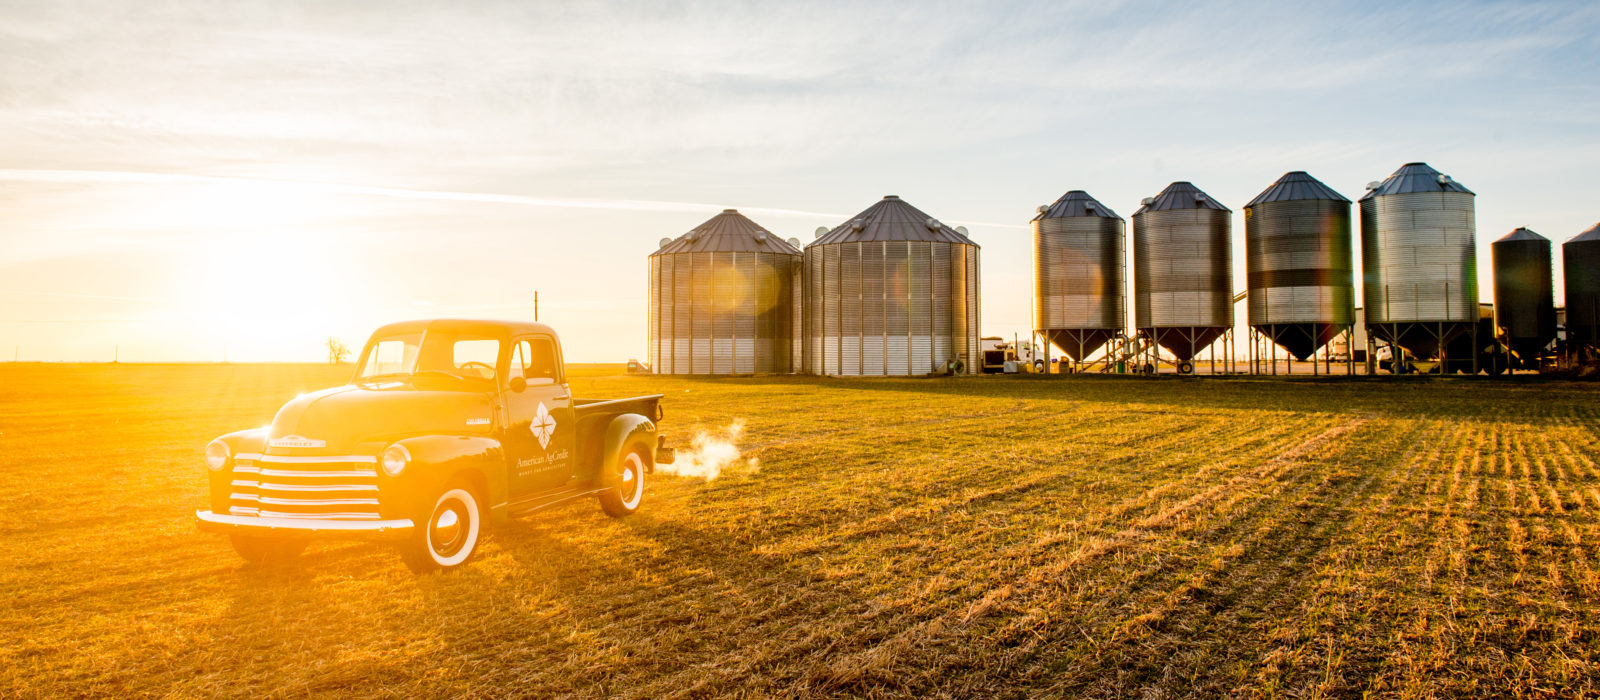 American Agcredit truck in front of silos at sunset